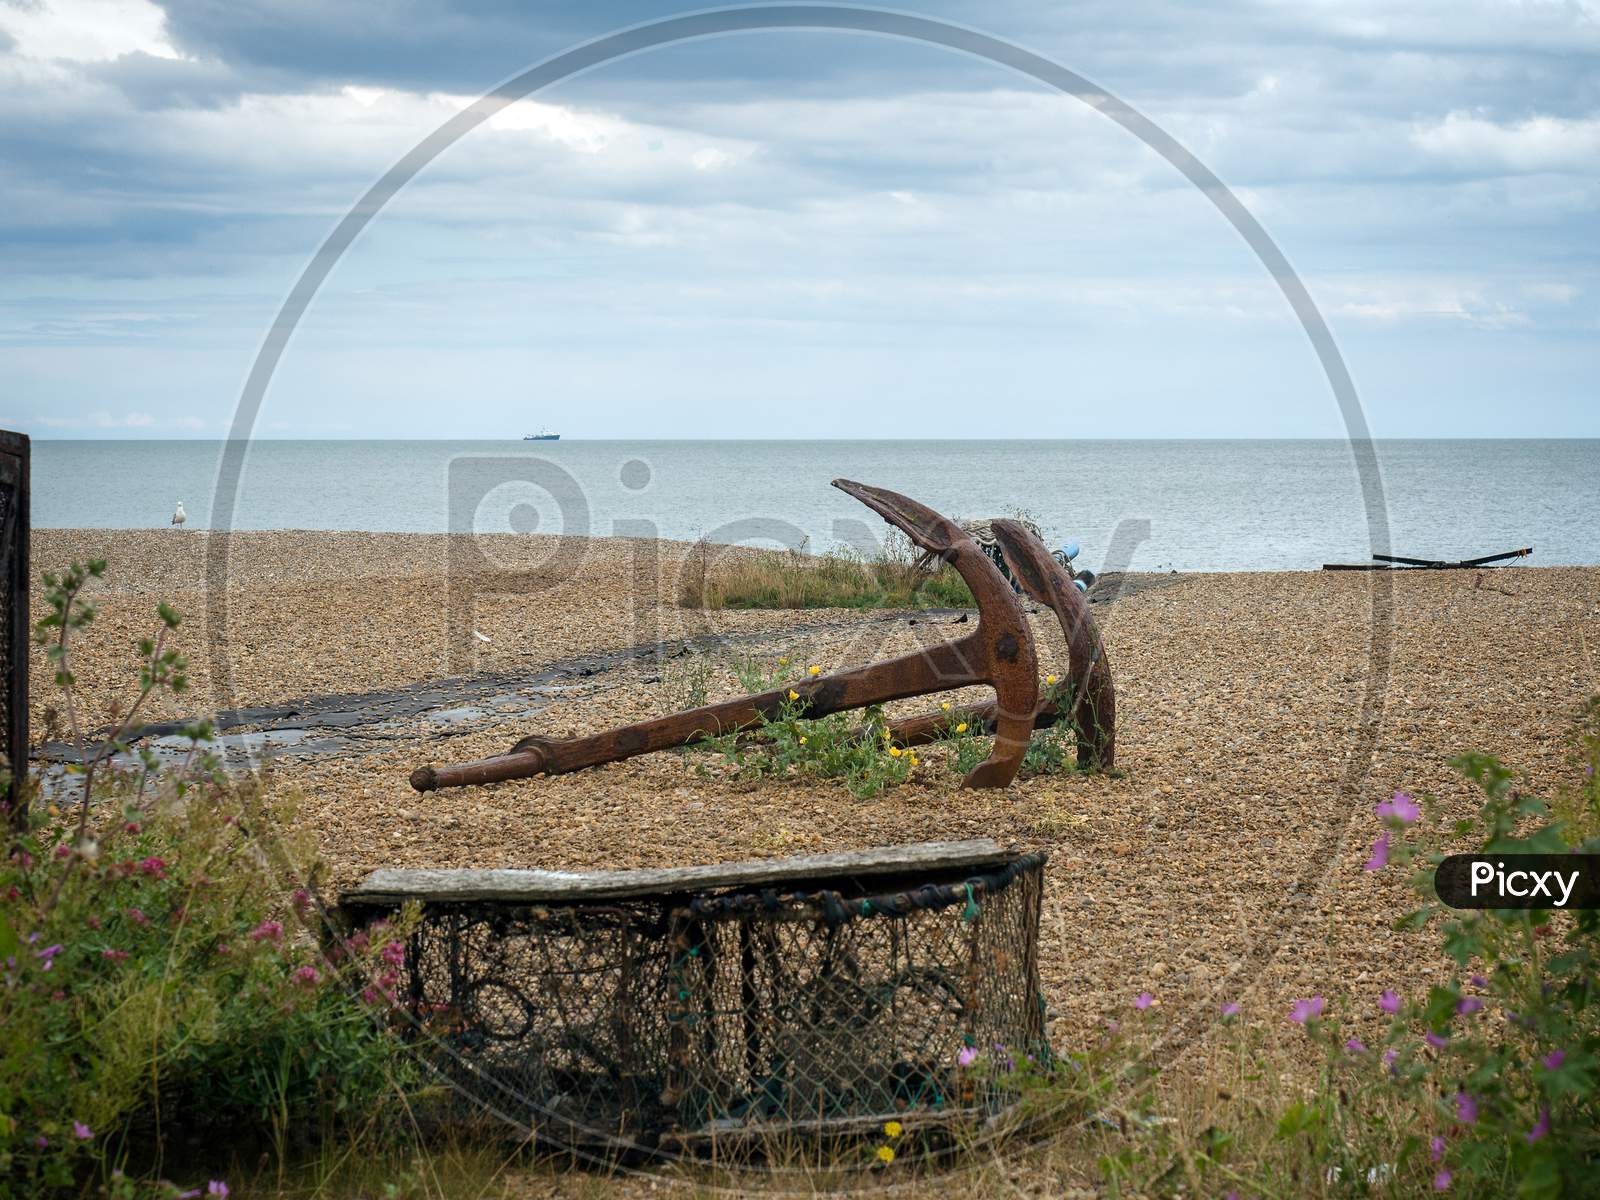 Rusty Anchors On The Beach At Aldeburgh